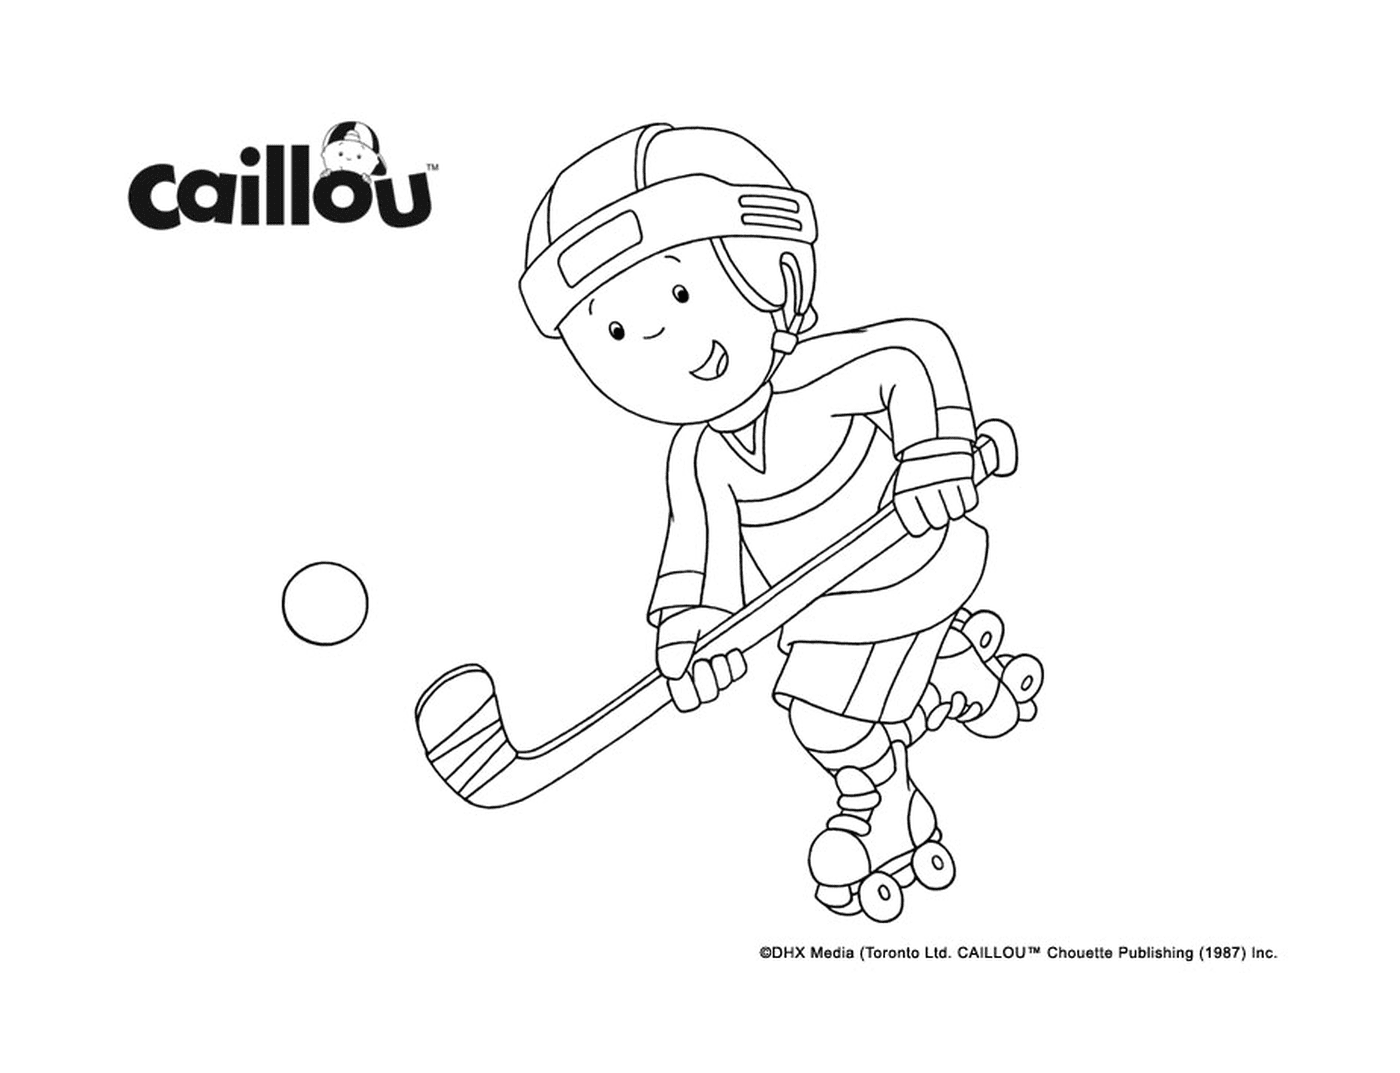  Caillou plays hockey for the Stanley Cup 